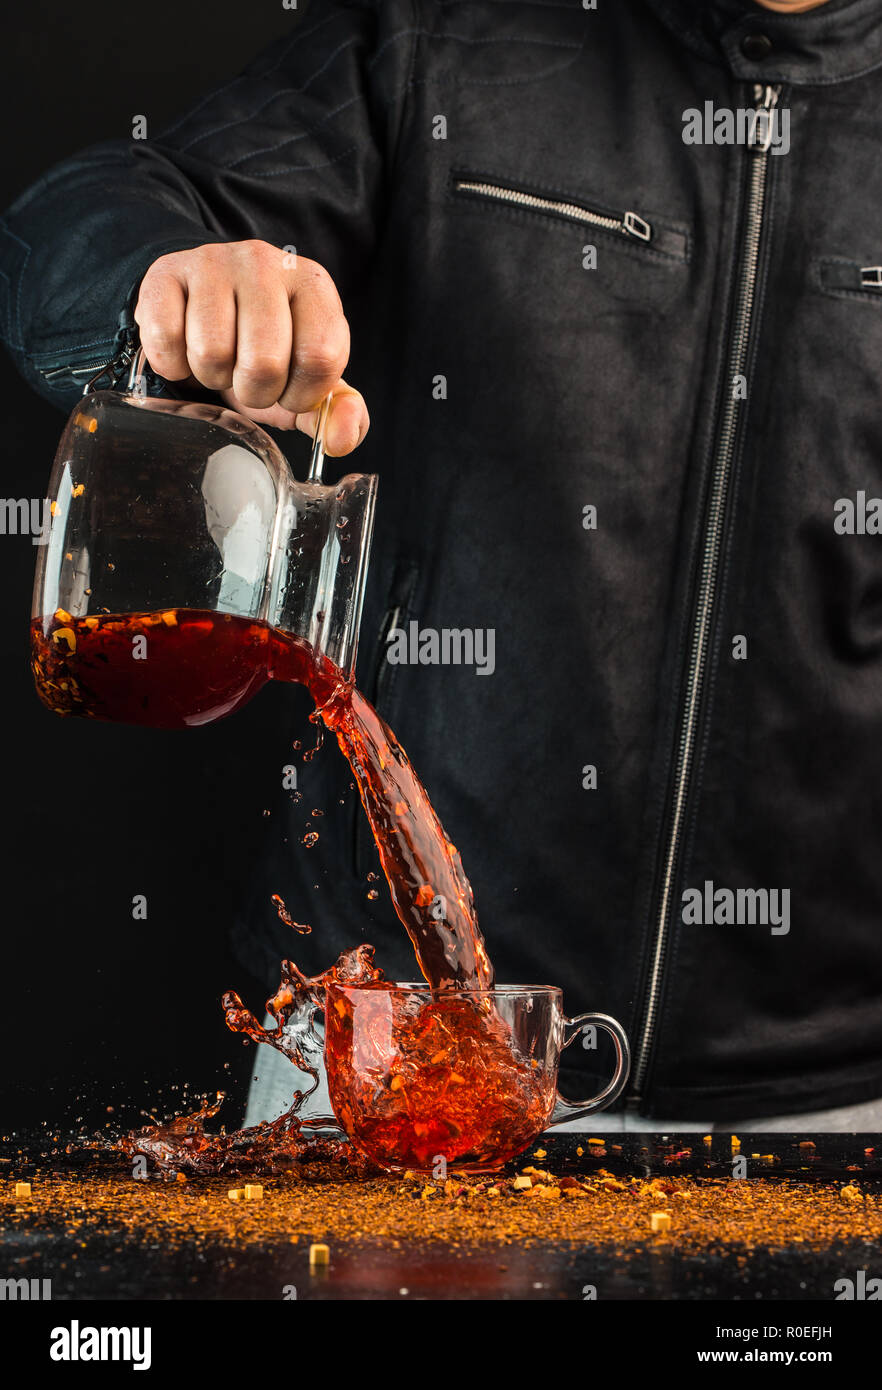 a man pours a drink from a jug into a glass cup, you can see drops and a liquid splash Stock Photo